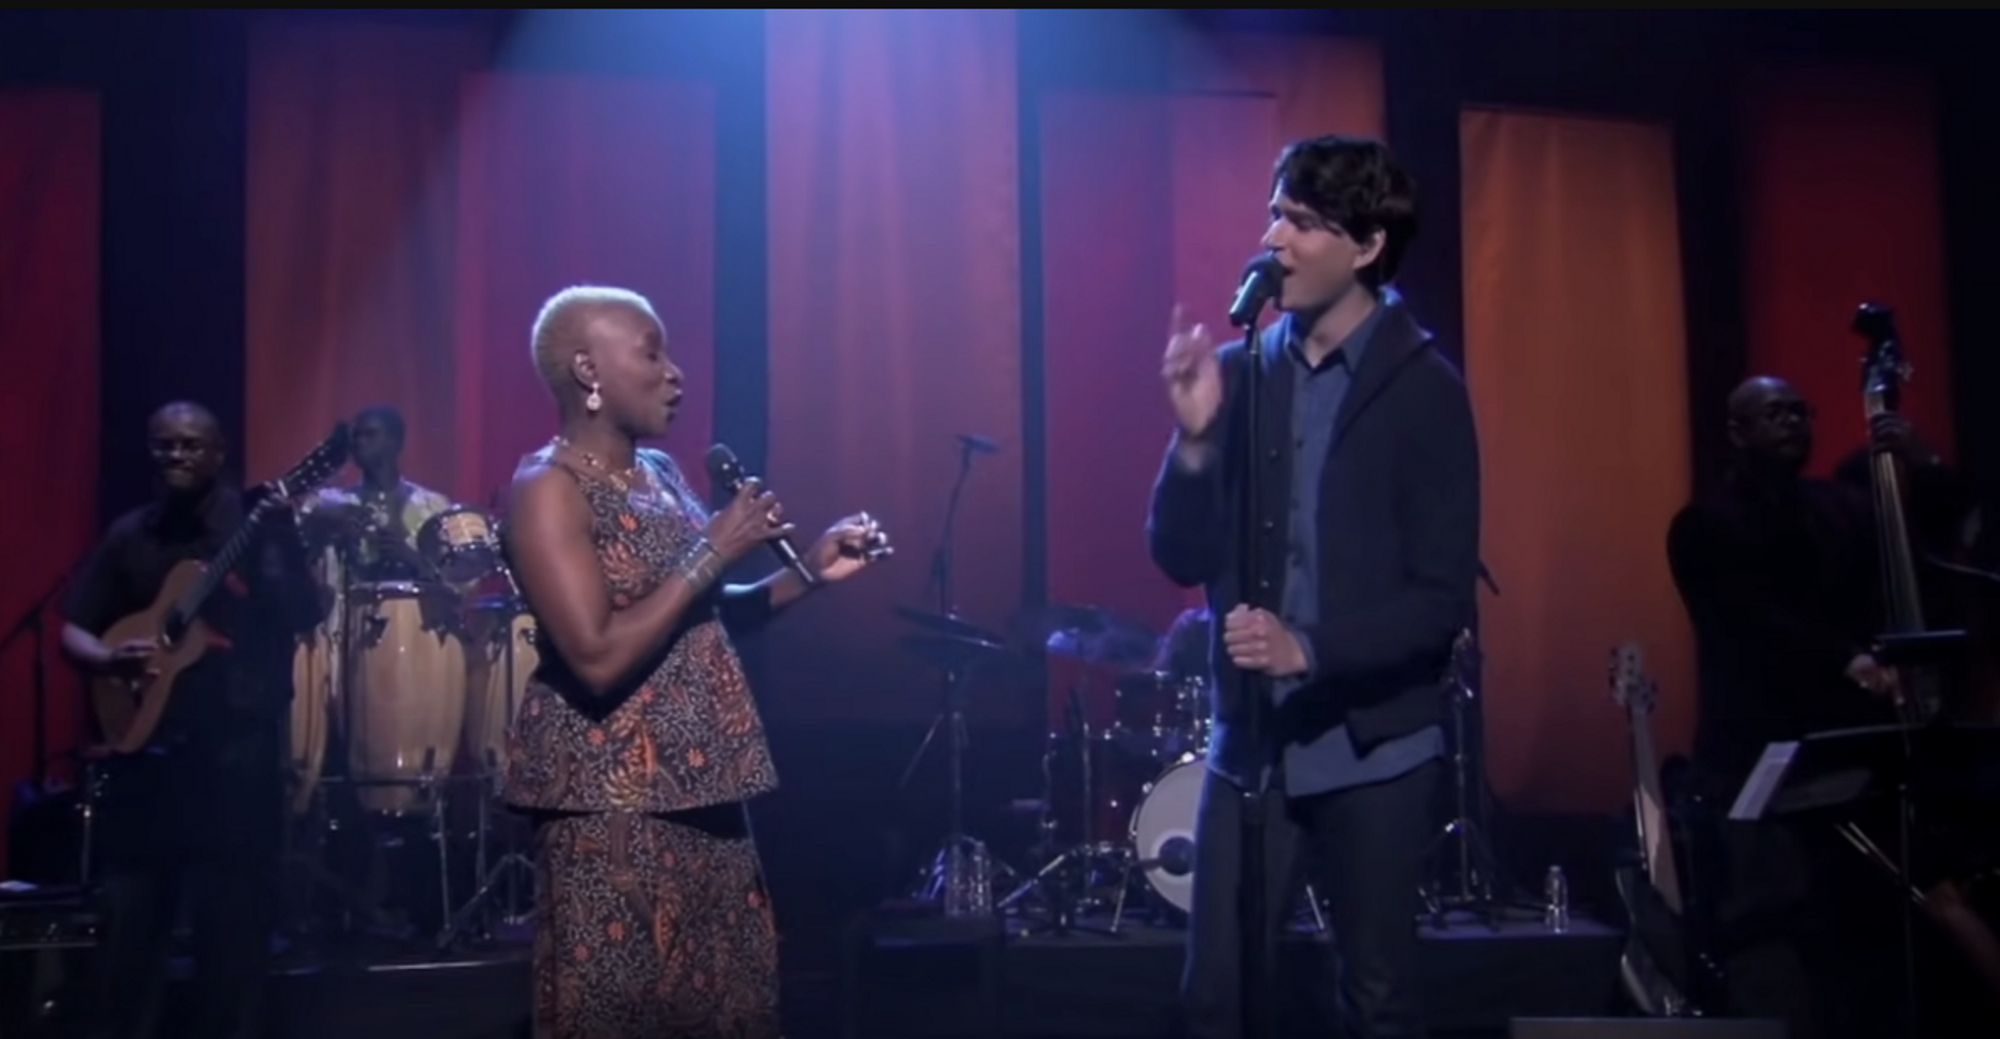 A black woman and a white man singing onstage